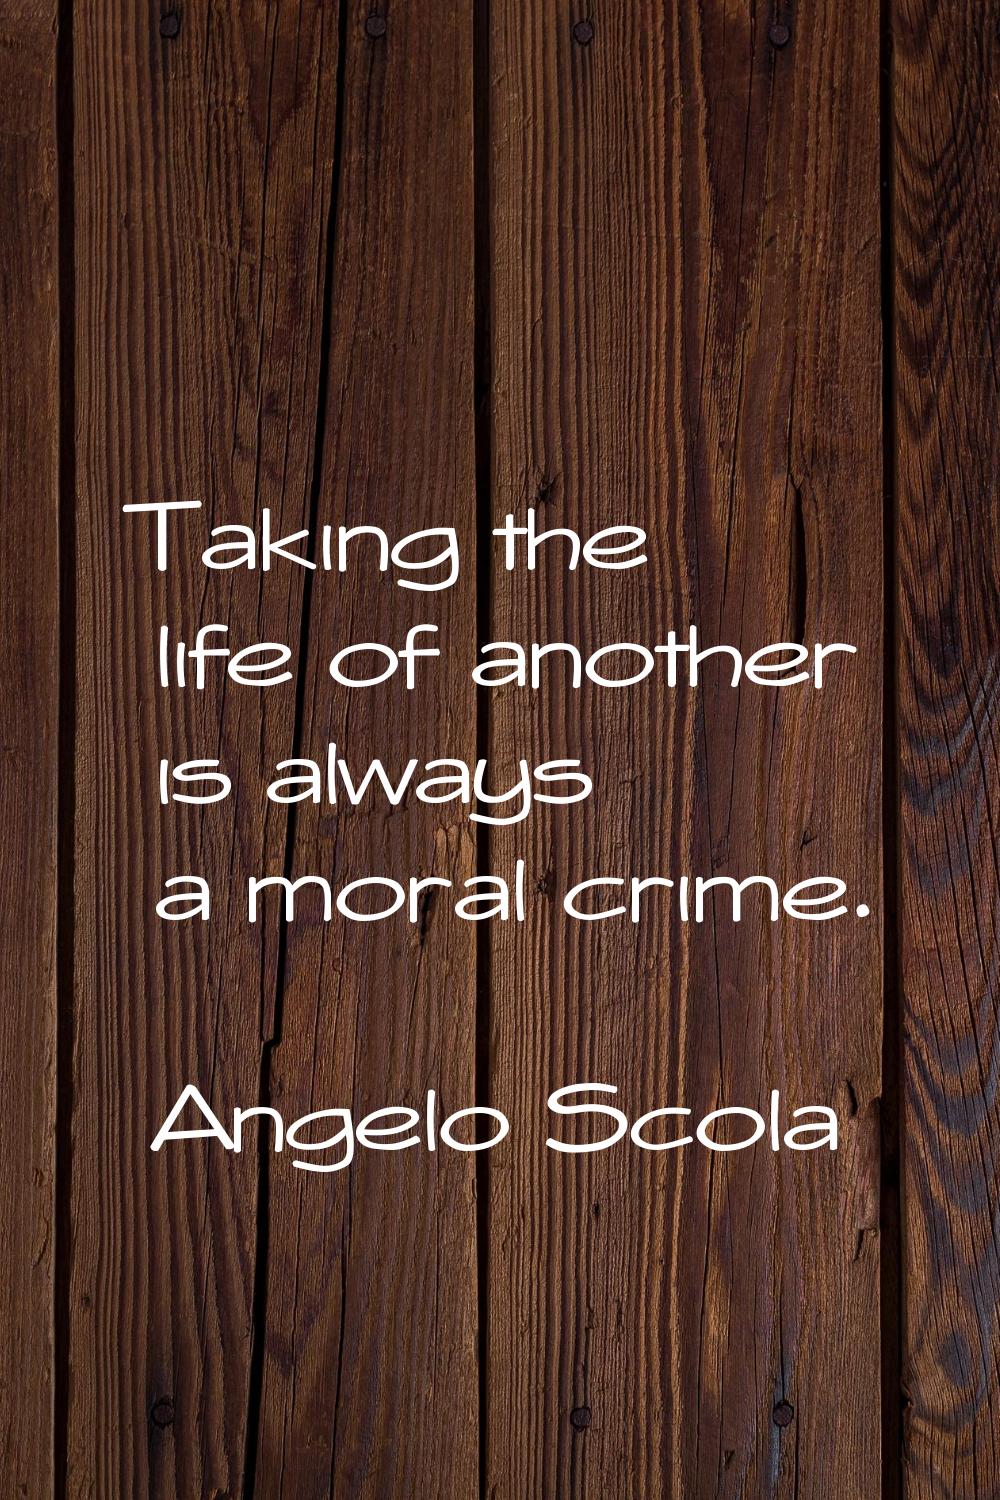 Taking the life of another is always a moral crime.